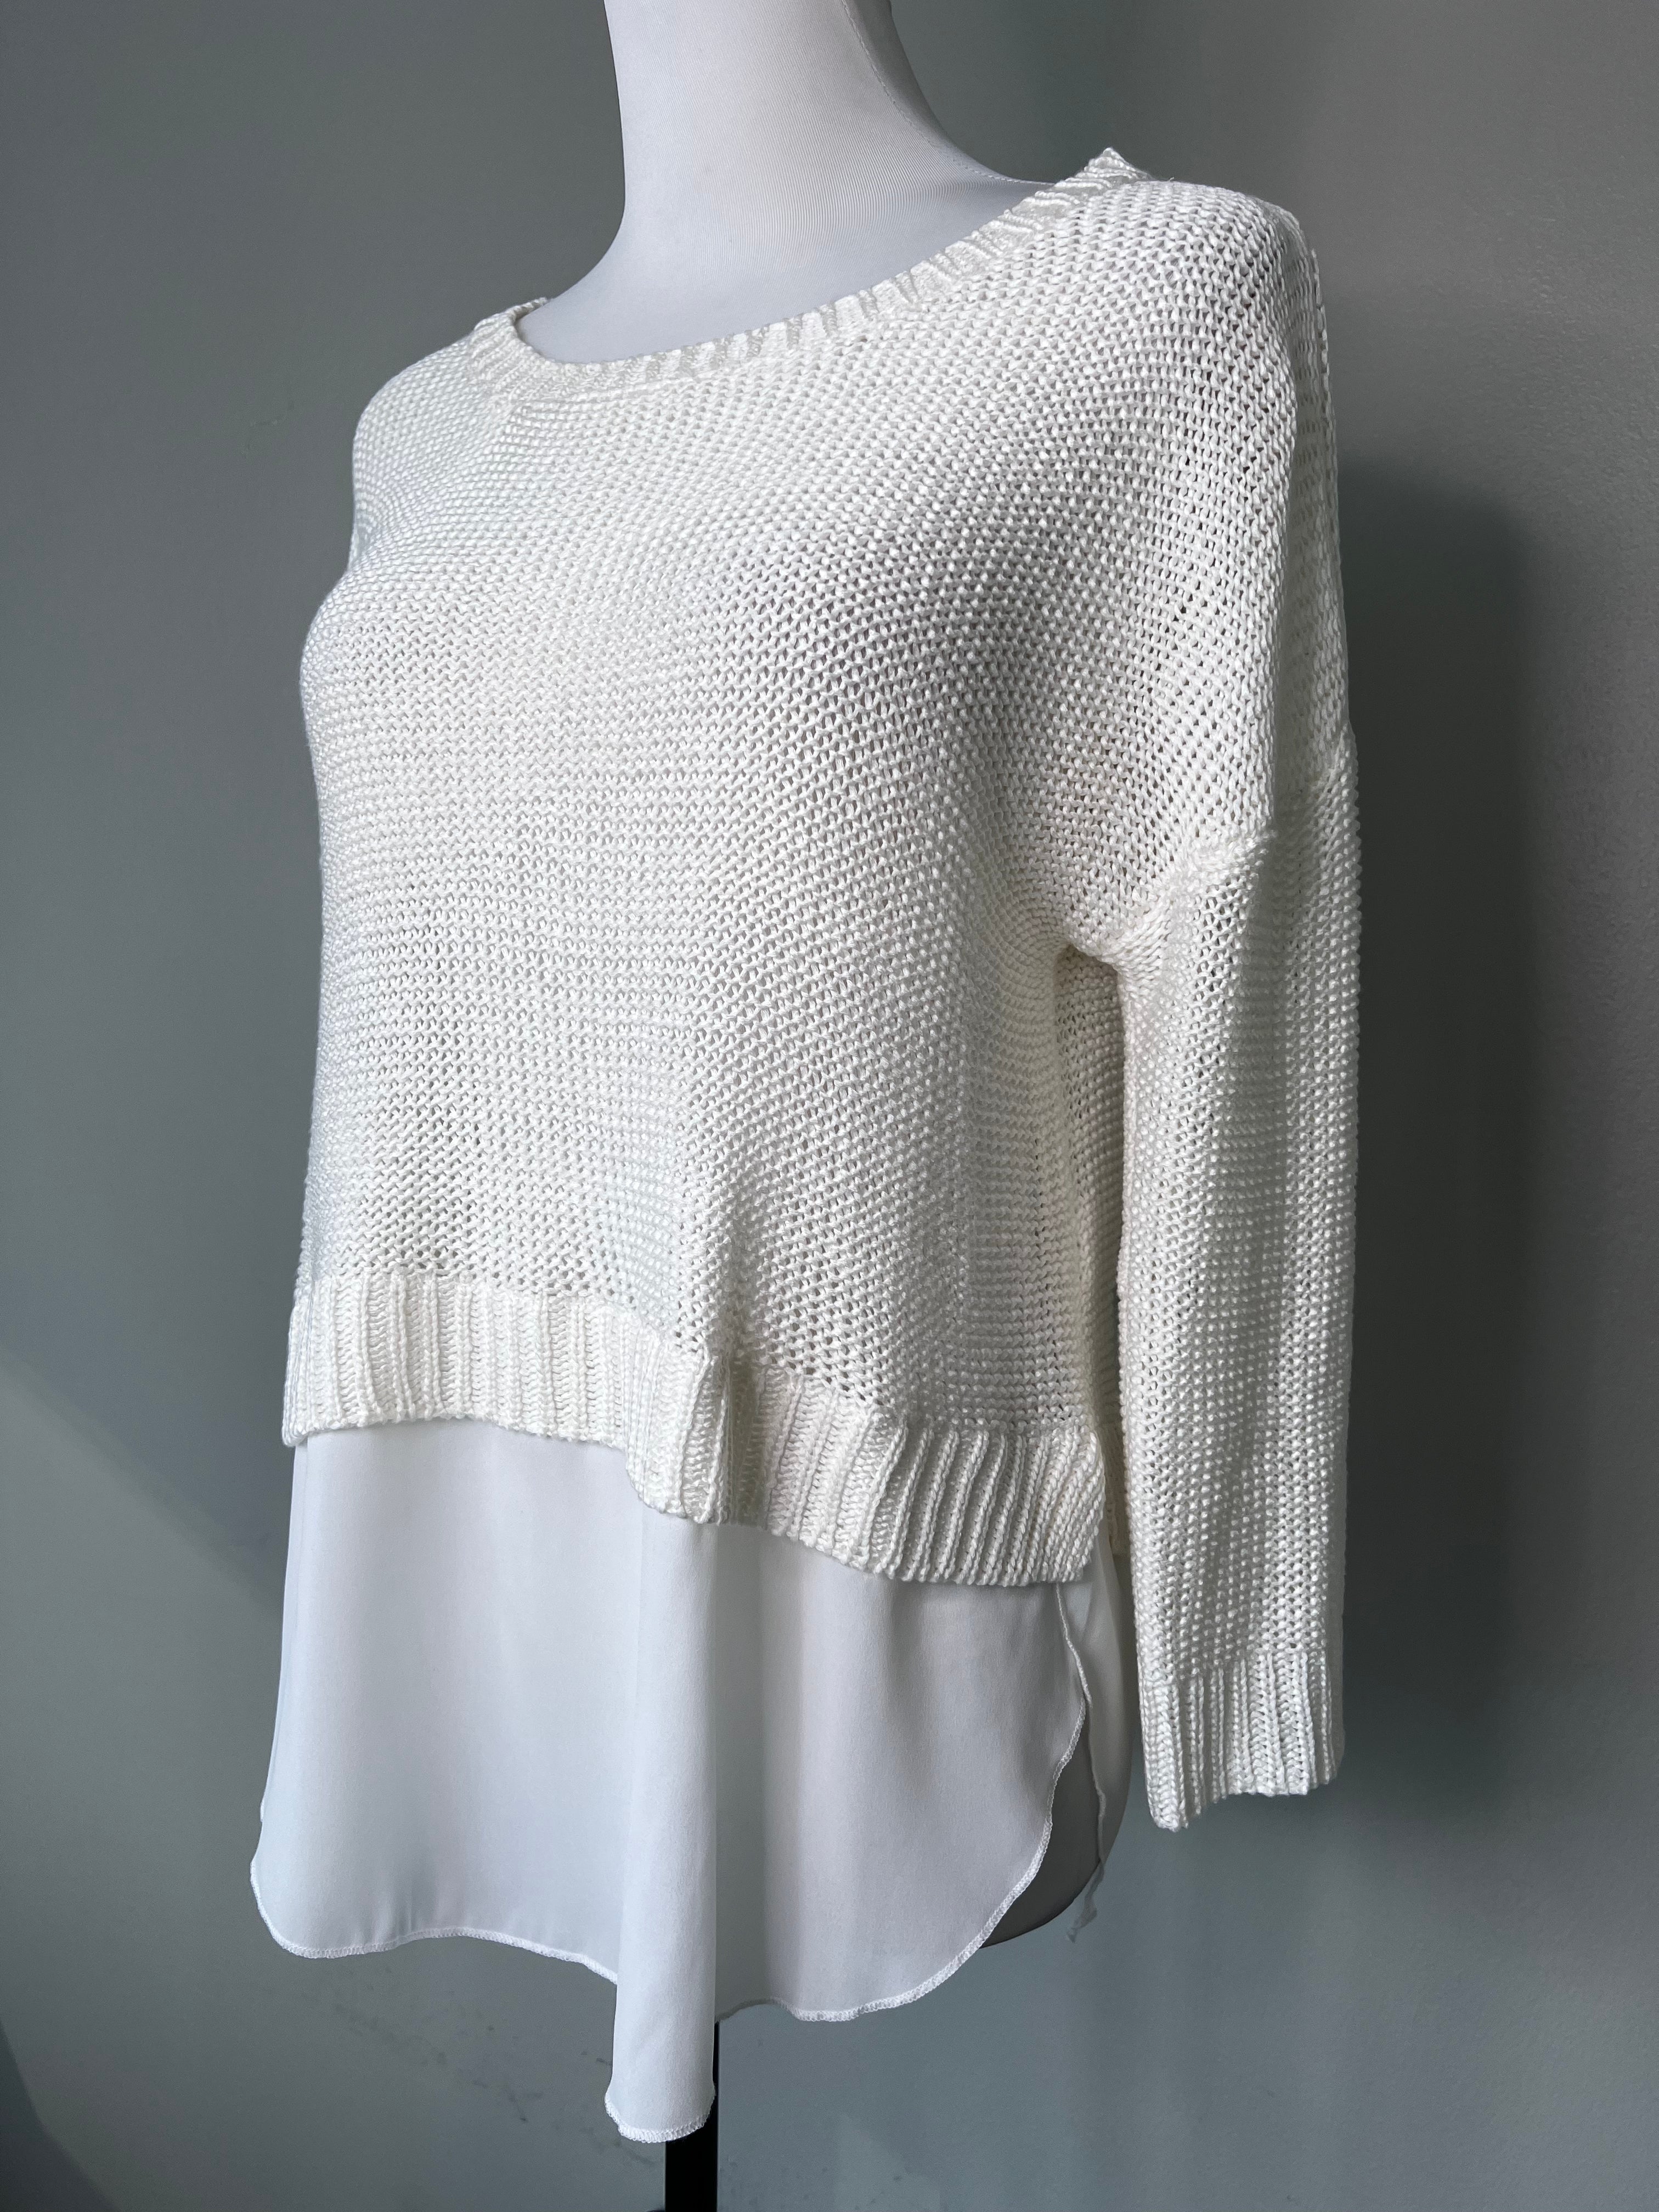 White two-layer knitted sweater with attached undershirt - AQUA